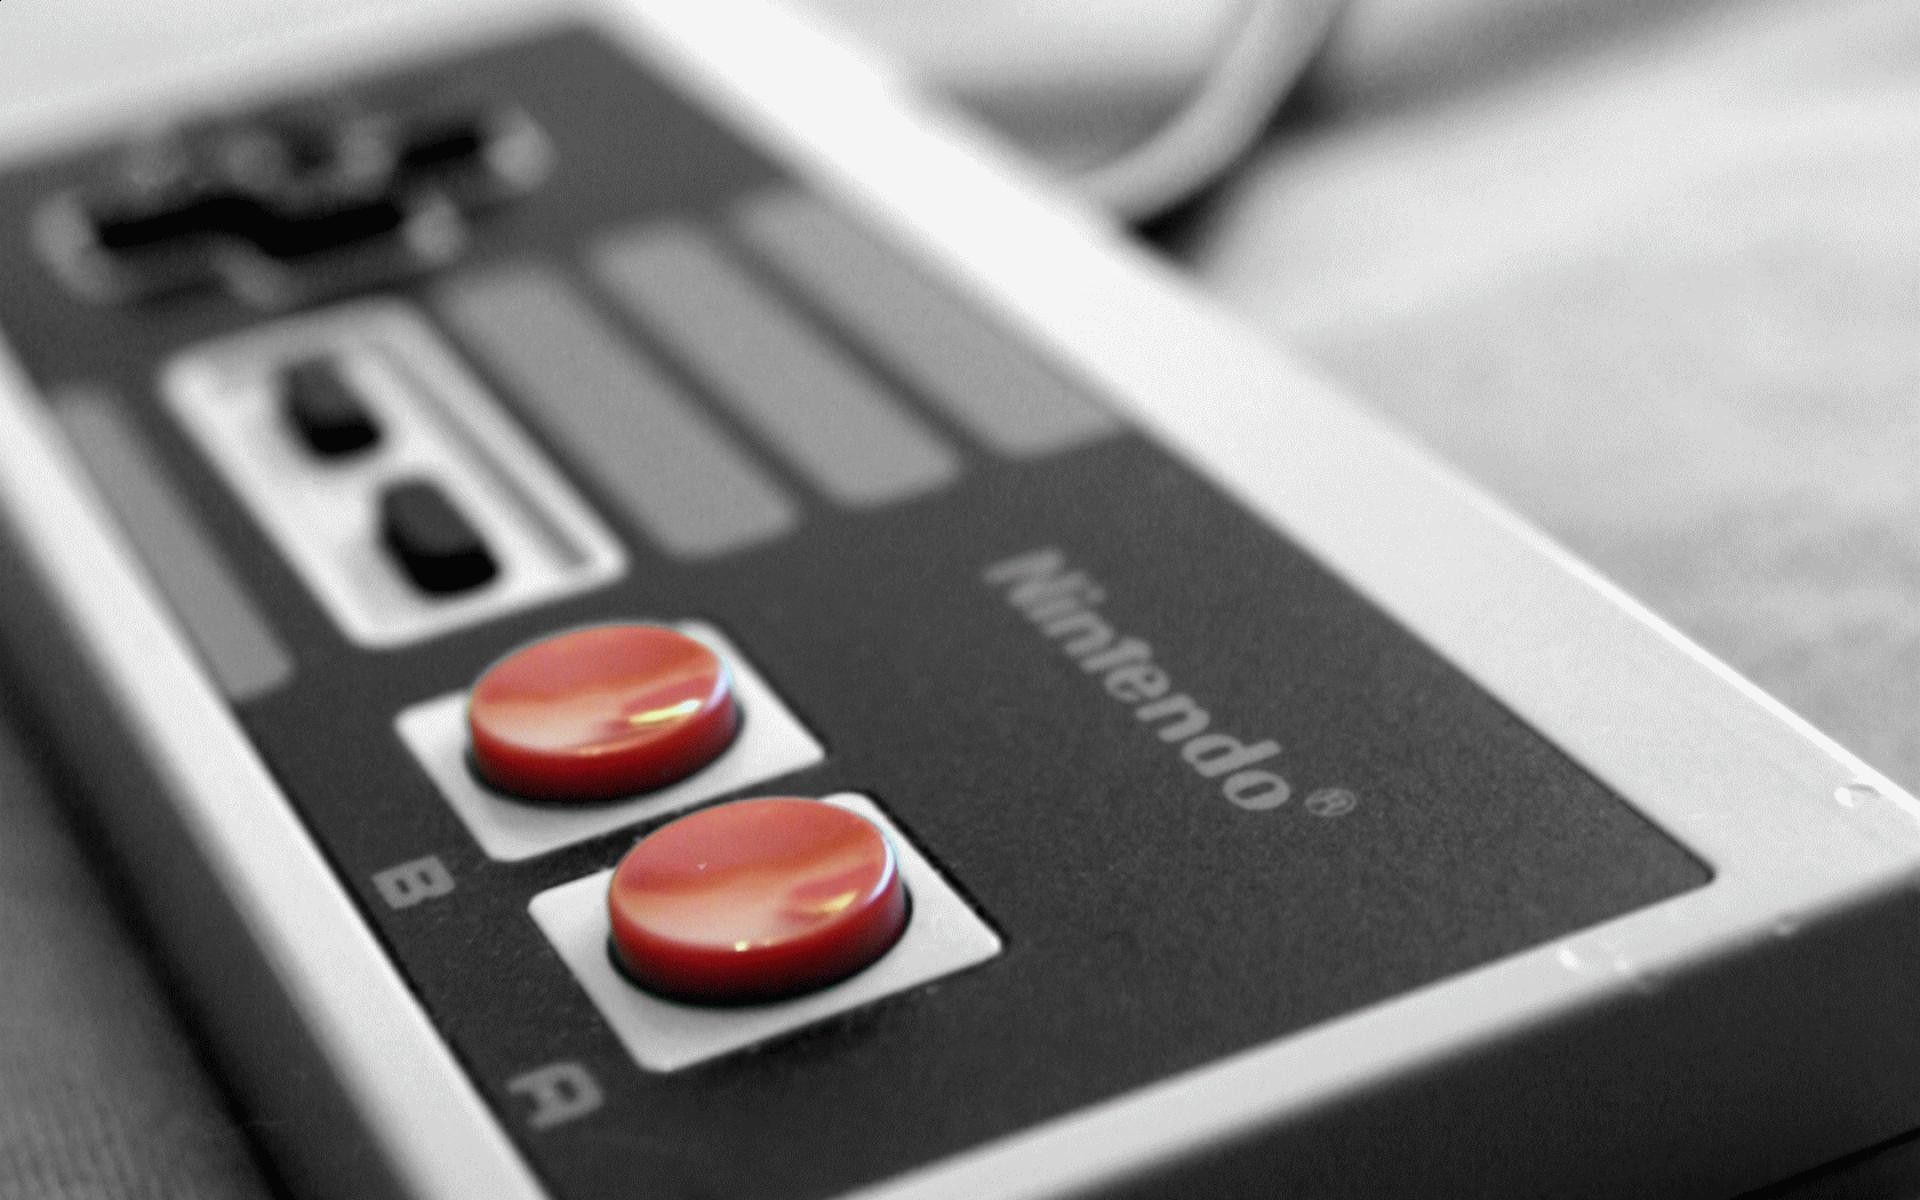 A Nintendo game controller with two red buttons. - Nintendo